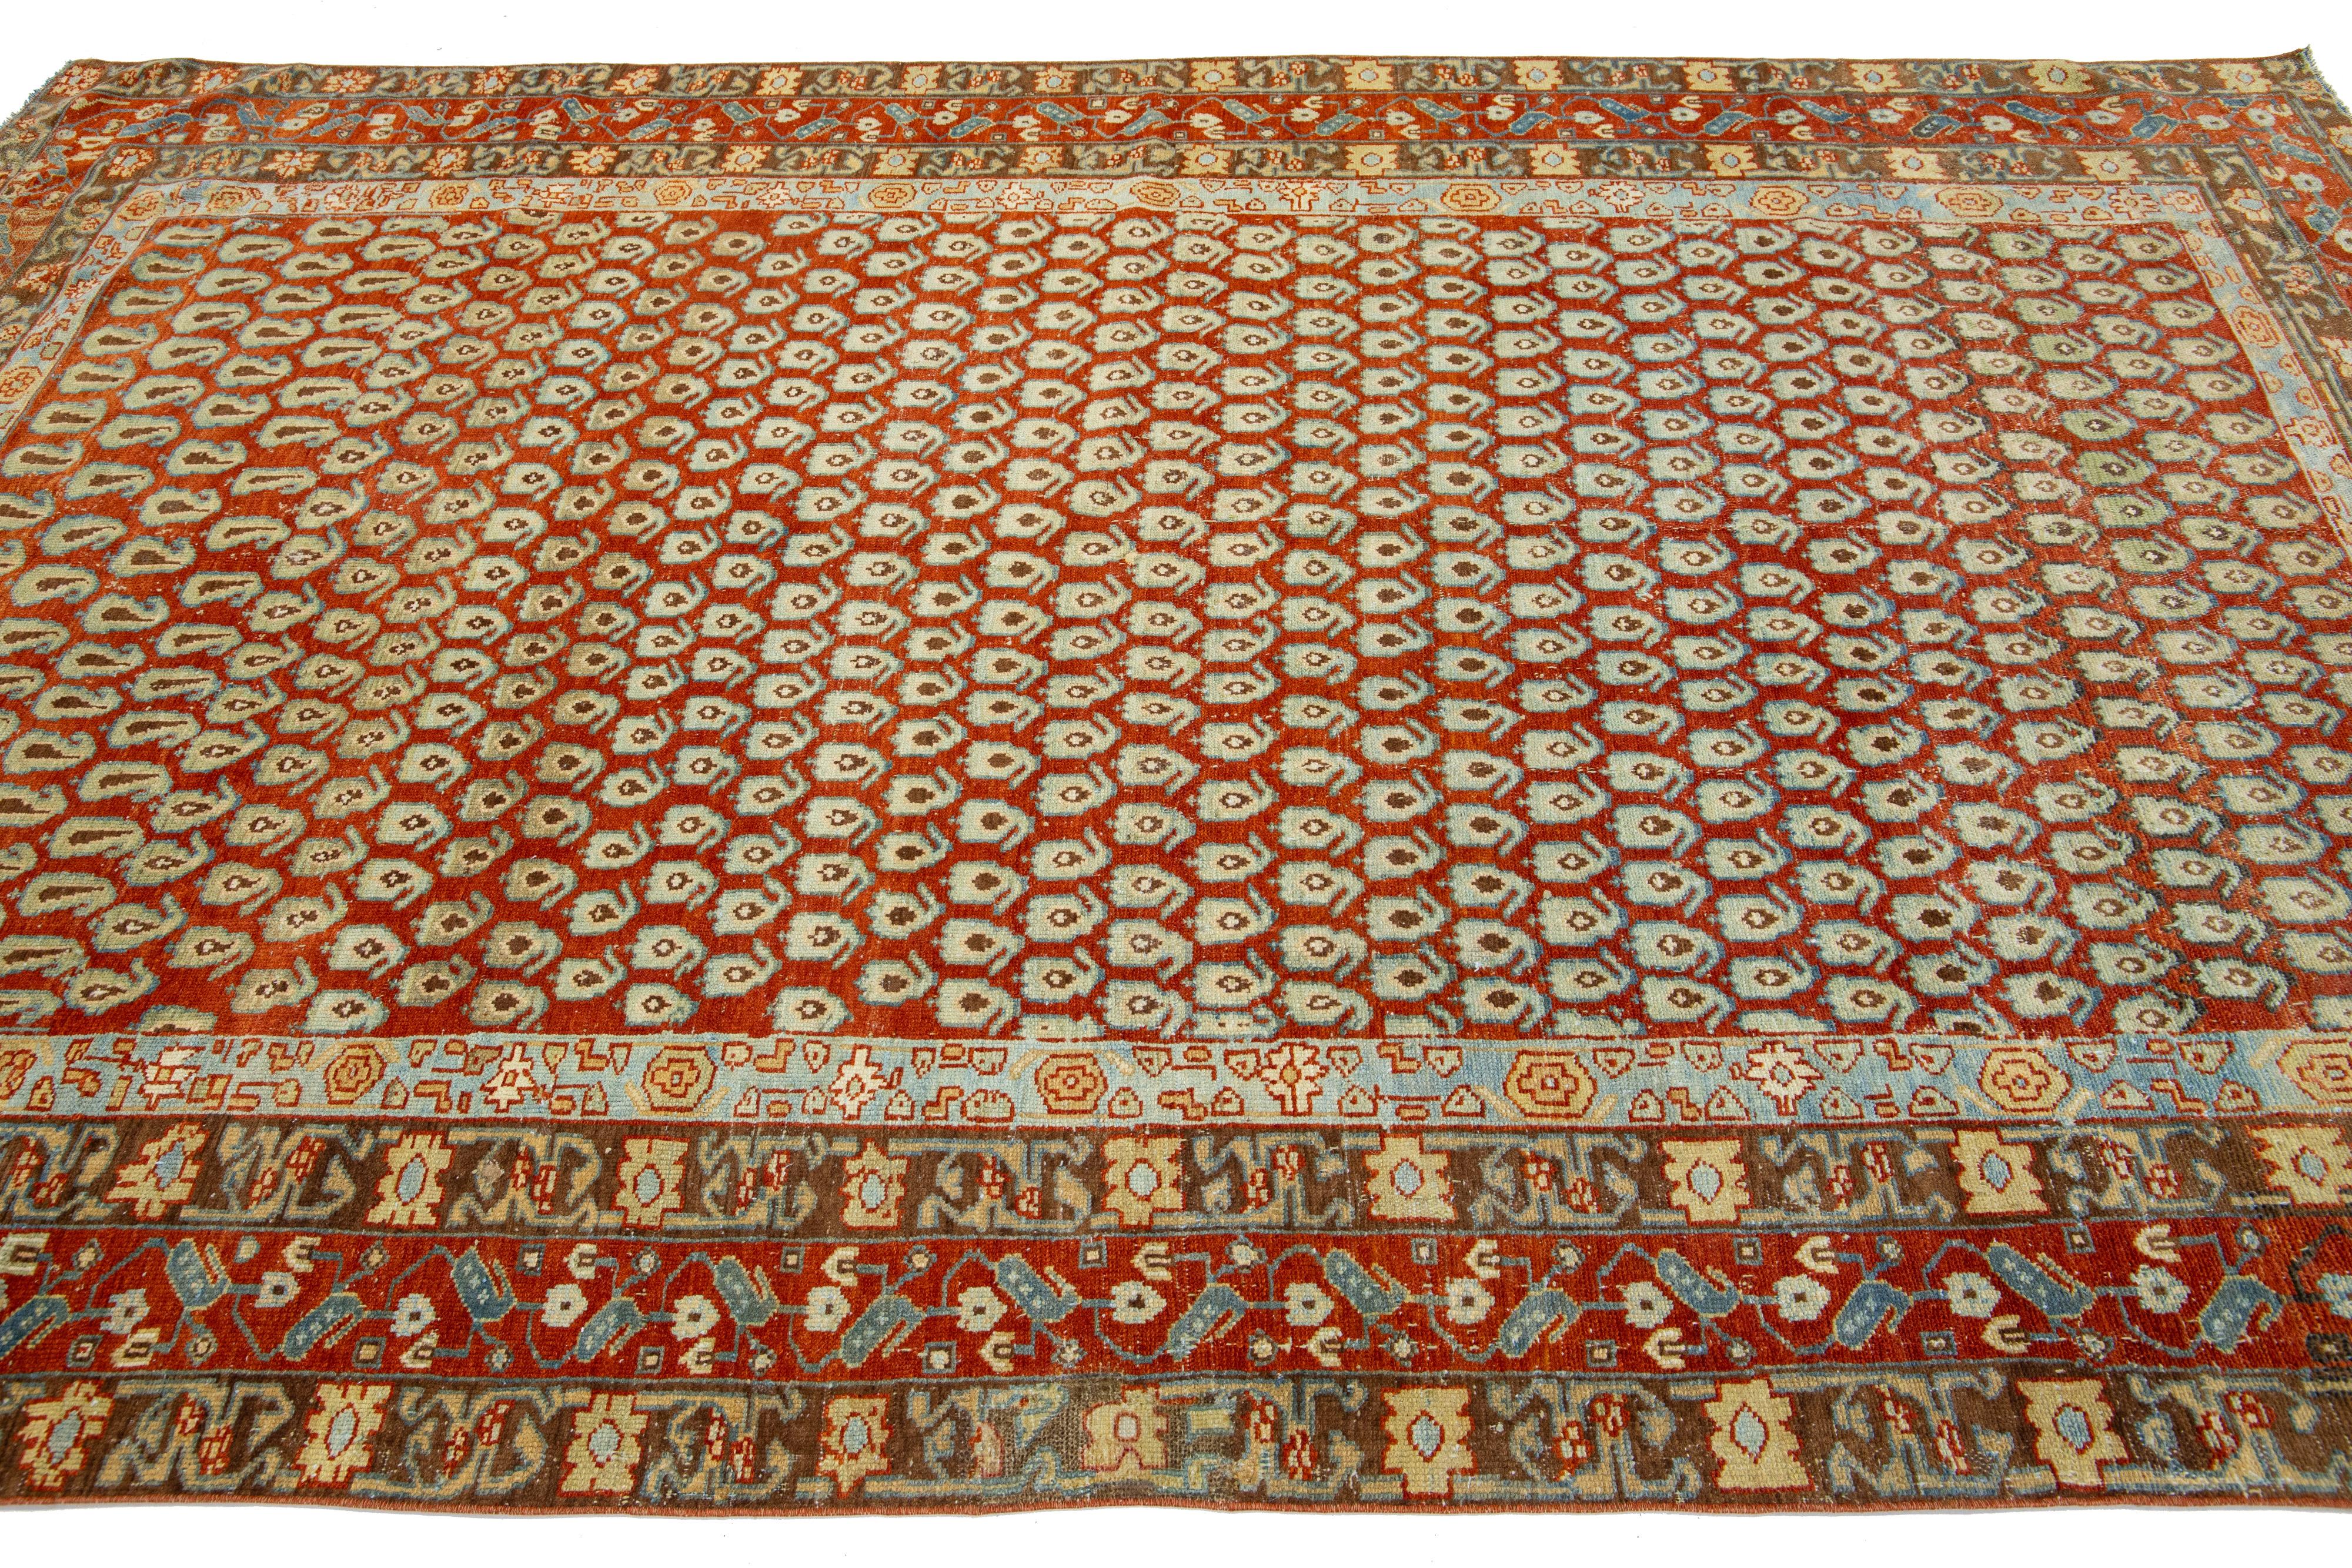 Hand-Knotted Allover Designed Antique Hamadan Persian Wool Rug In Red-Rust Color For Sale